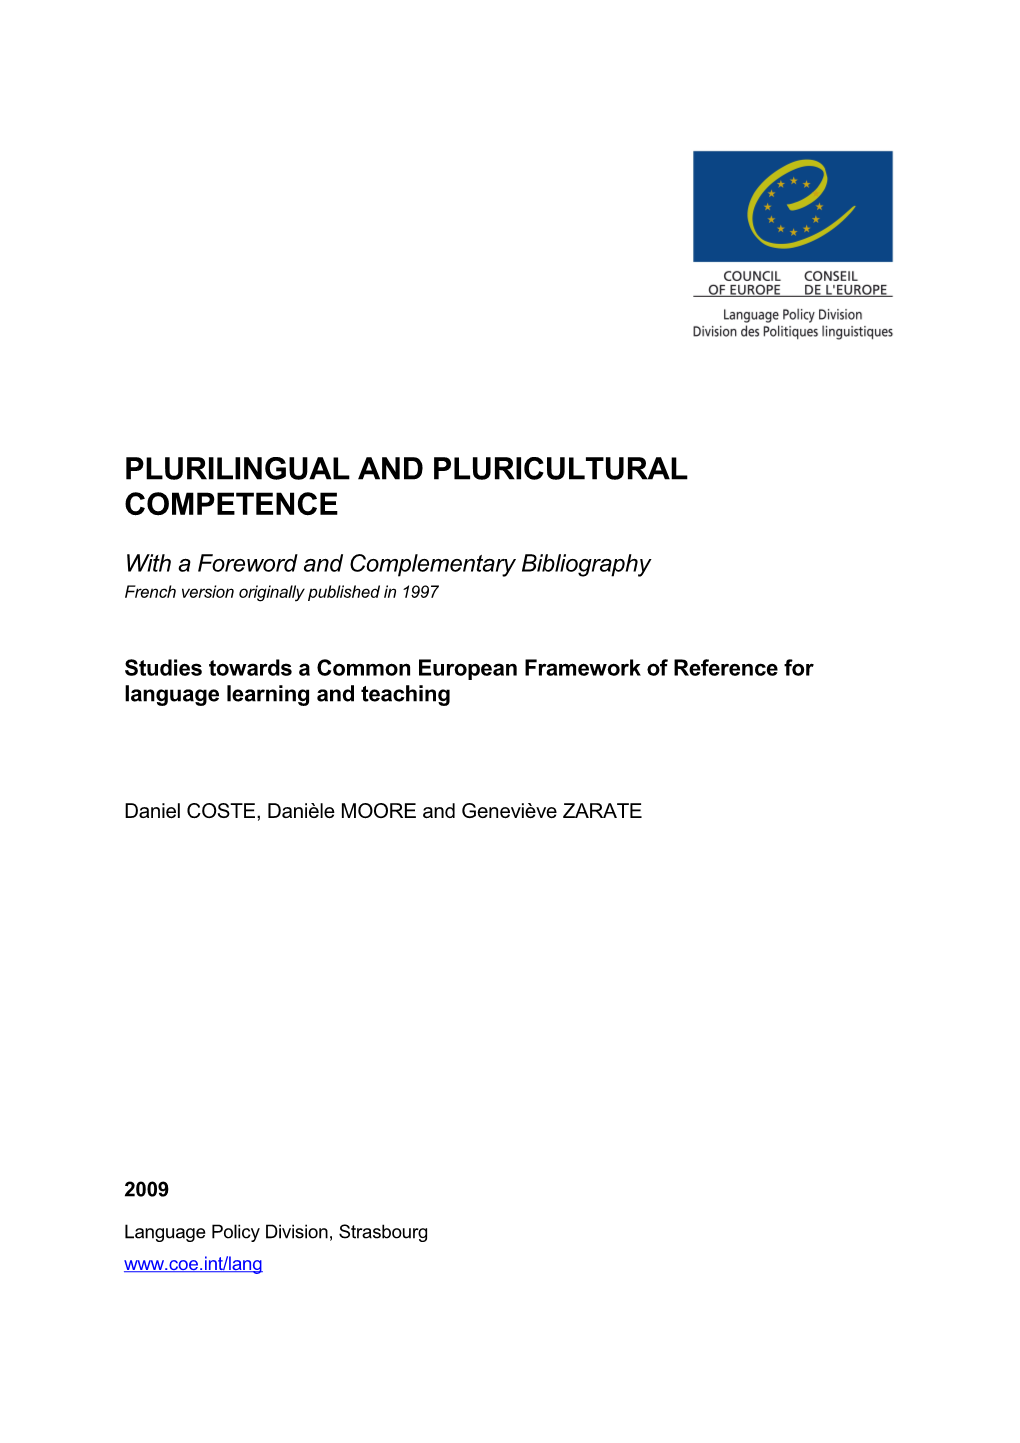 Plurilingual and Pluricultural